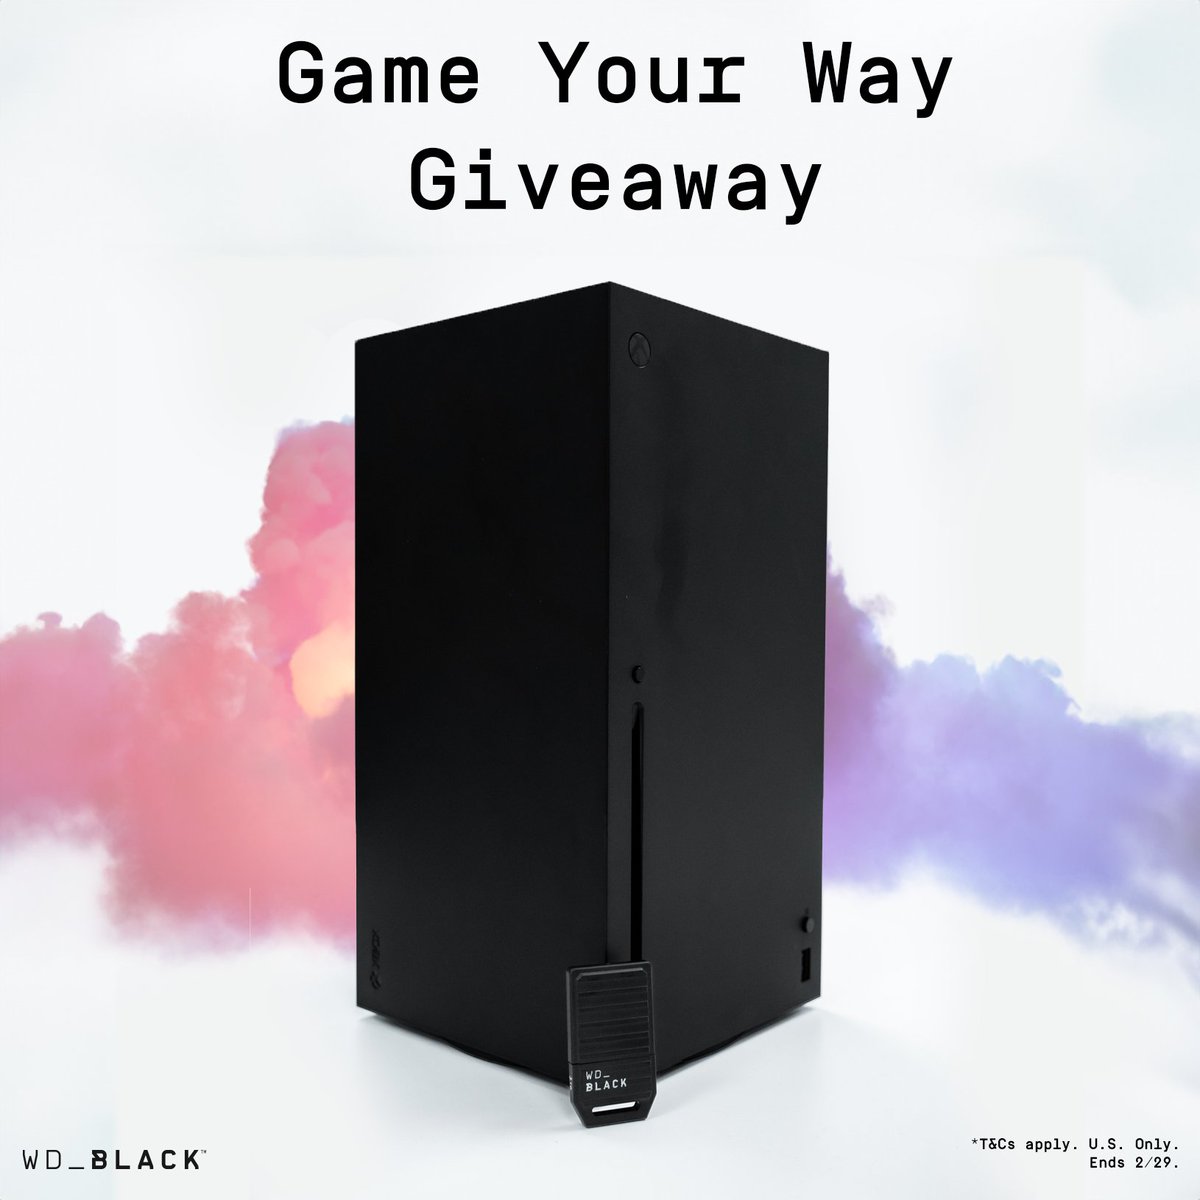 Giveaway time 🥳🧡🖤 Game Your Way with WD_BLACK! Enter for a chance to win an Xbox Series X and a 1TB WD_BLACK C50 Expansion Card for Xbox 🎮 bit.ly/3SlNprf *T&Cs apply. U.S. Only. Ends 2/29.